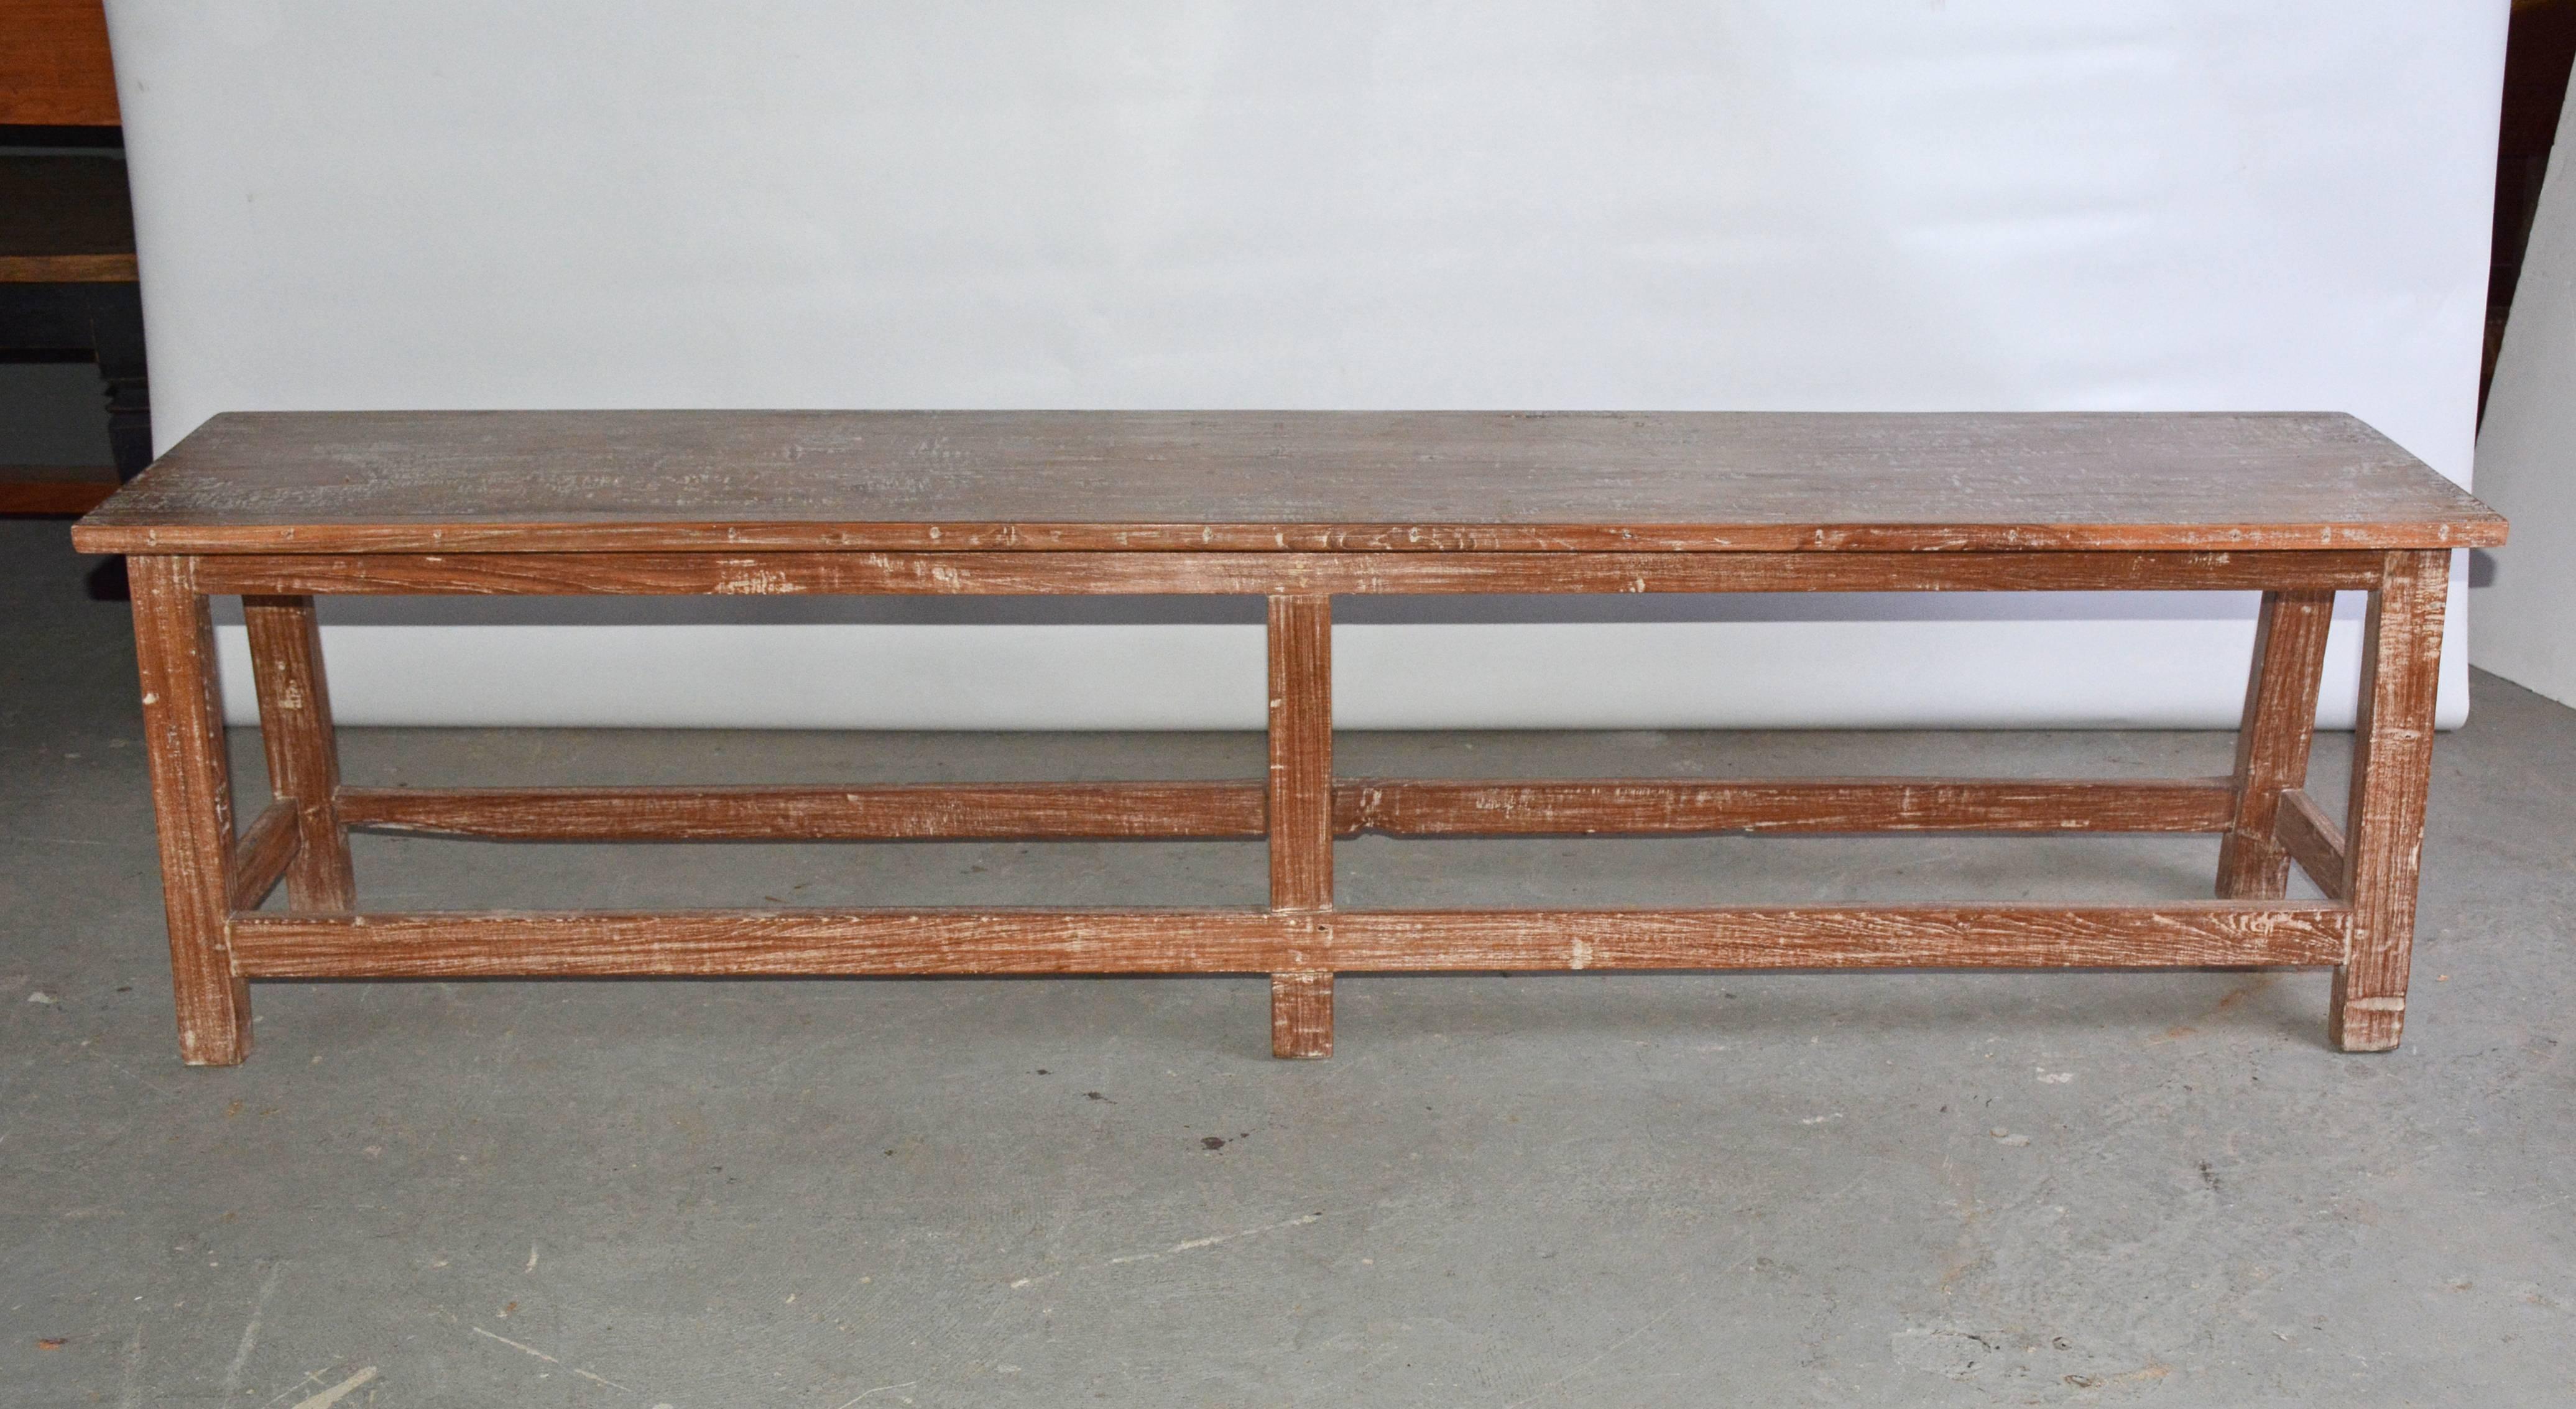 The rustic teak piece is at the right height to be used as a bench or coffee table. Stretchers secure the six legs. Perfect for dining table seating or use as garden or patio furniture.
 